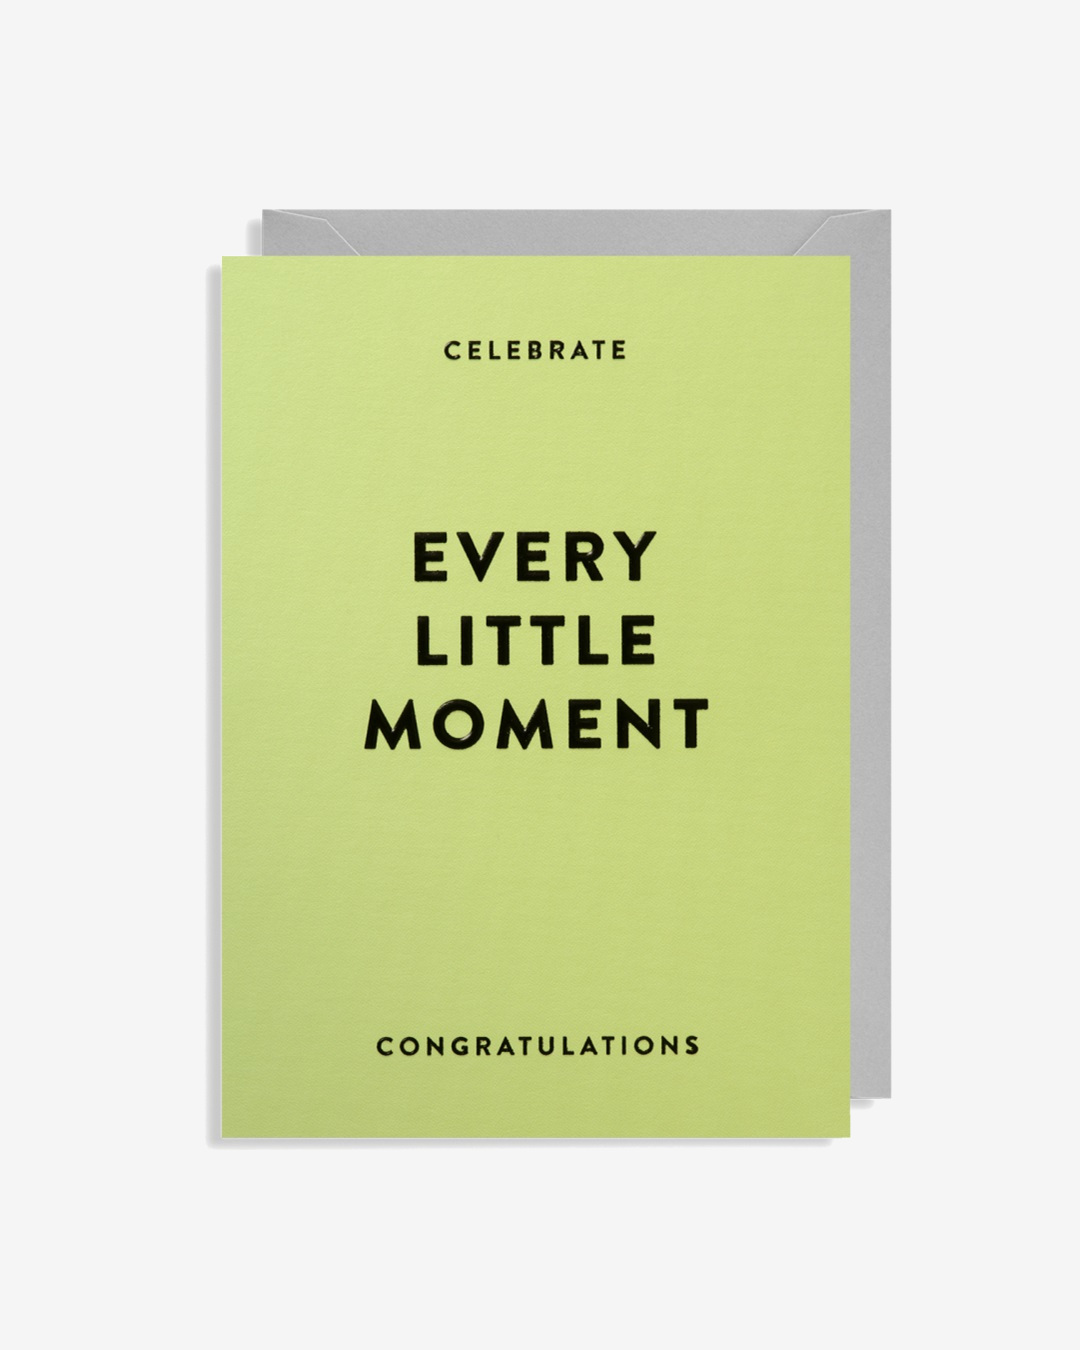 Every little moment card